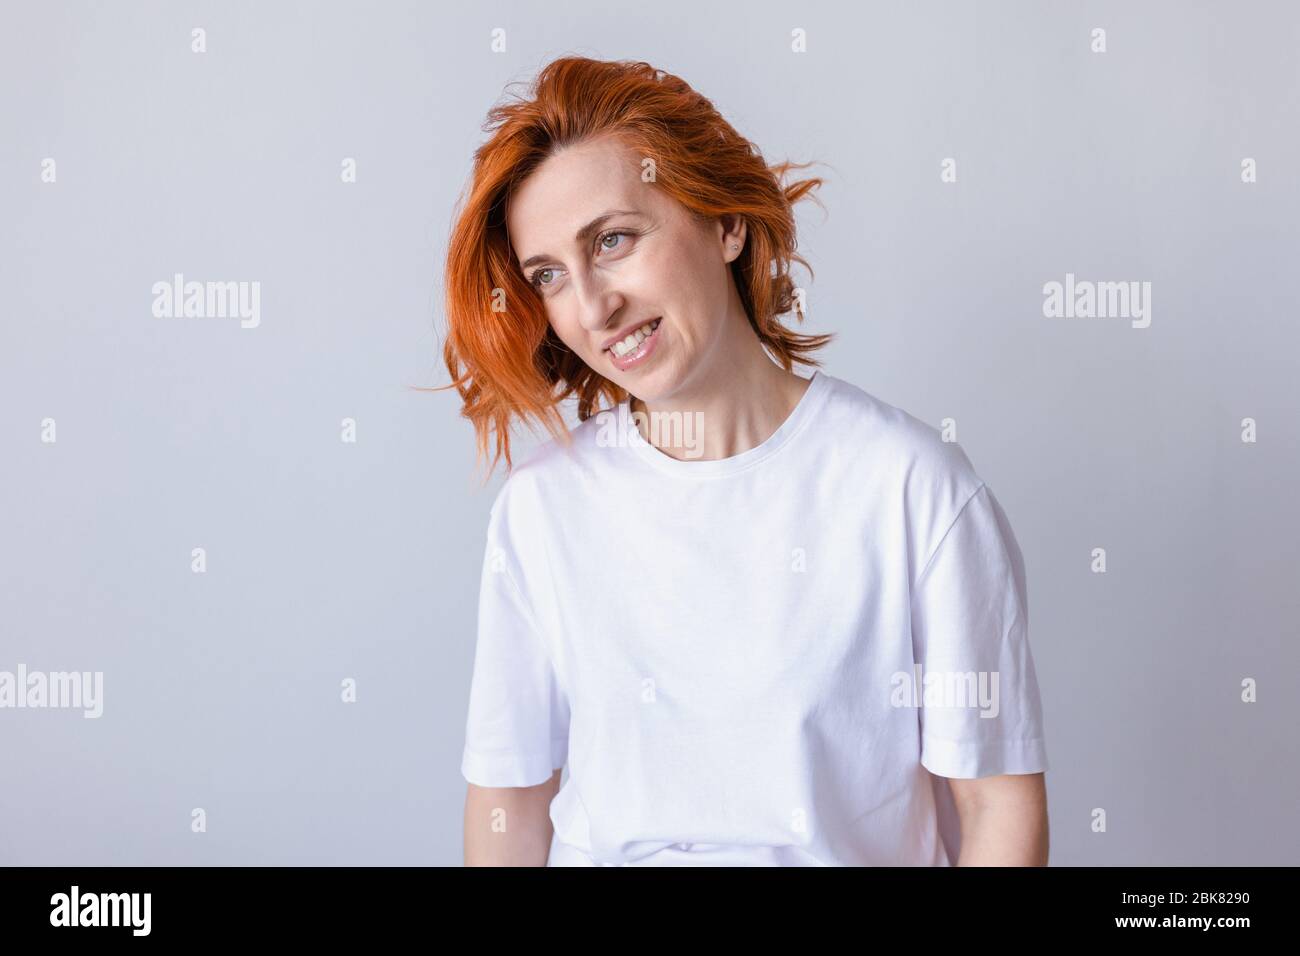 Smiling redhead woman looking somewhere wearing white t-shirt Stock Photo